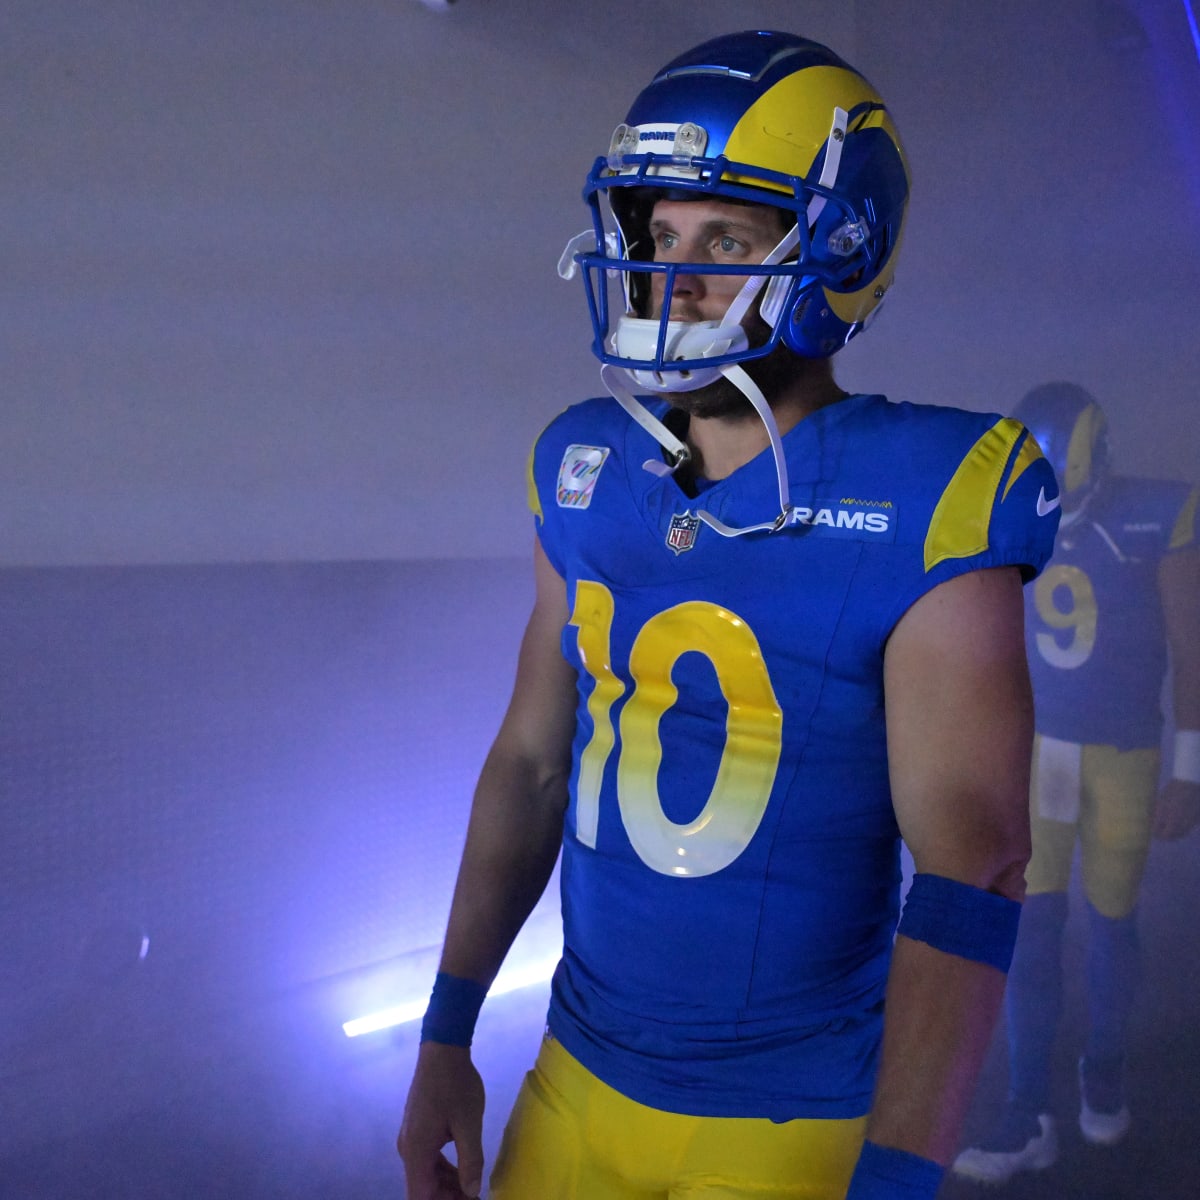 LA Rams: Enough time has passed concerning the new uniforms